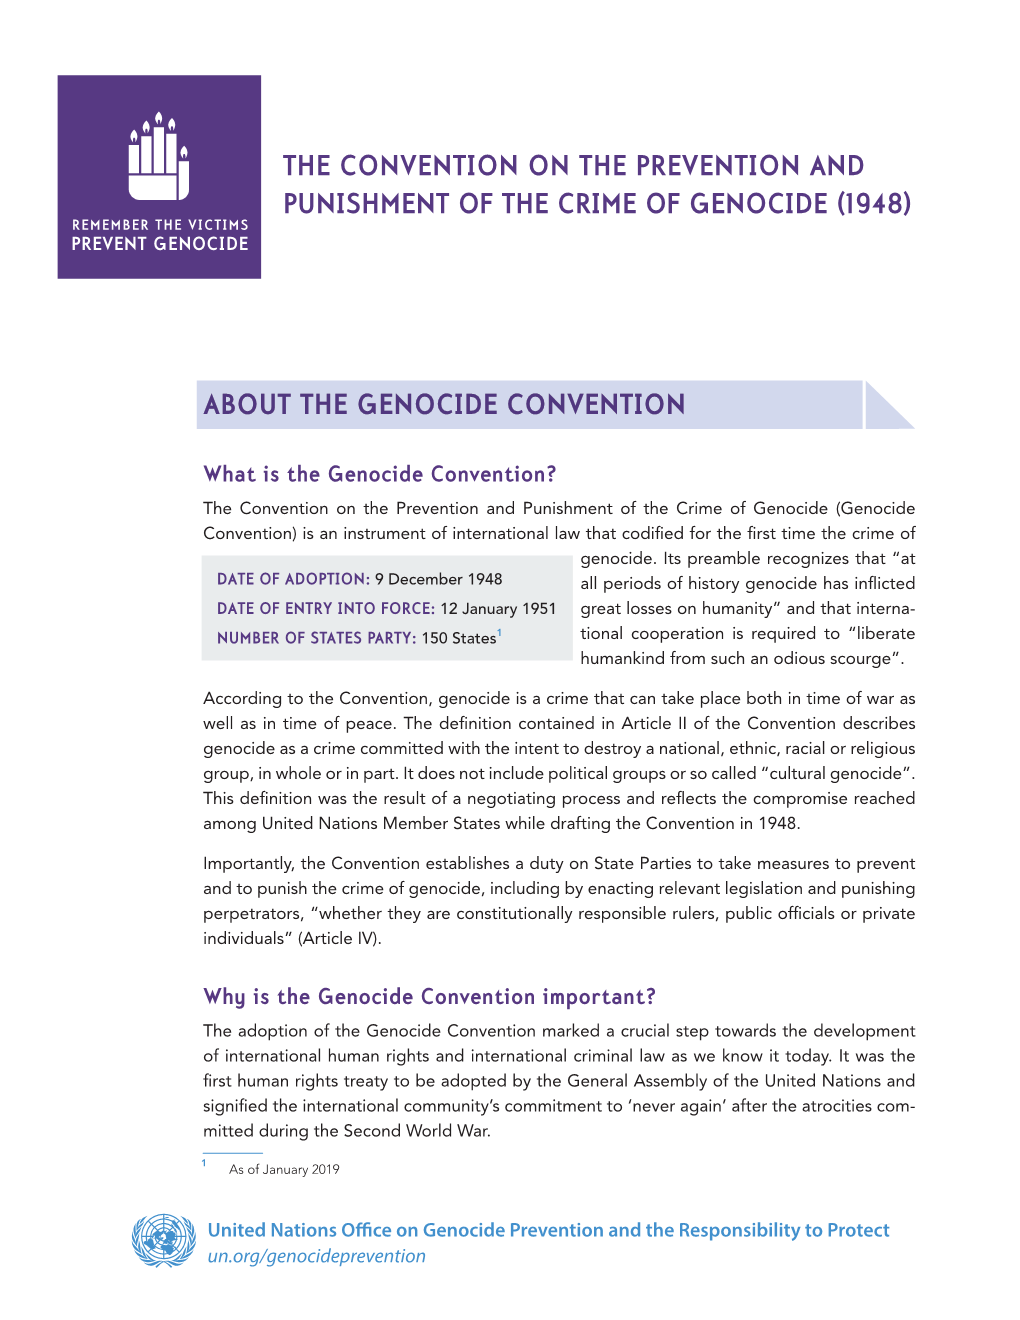 About the Genocide Convention the Convention